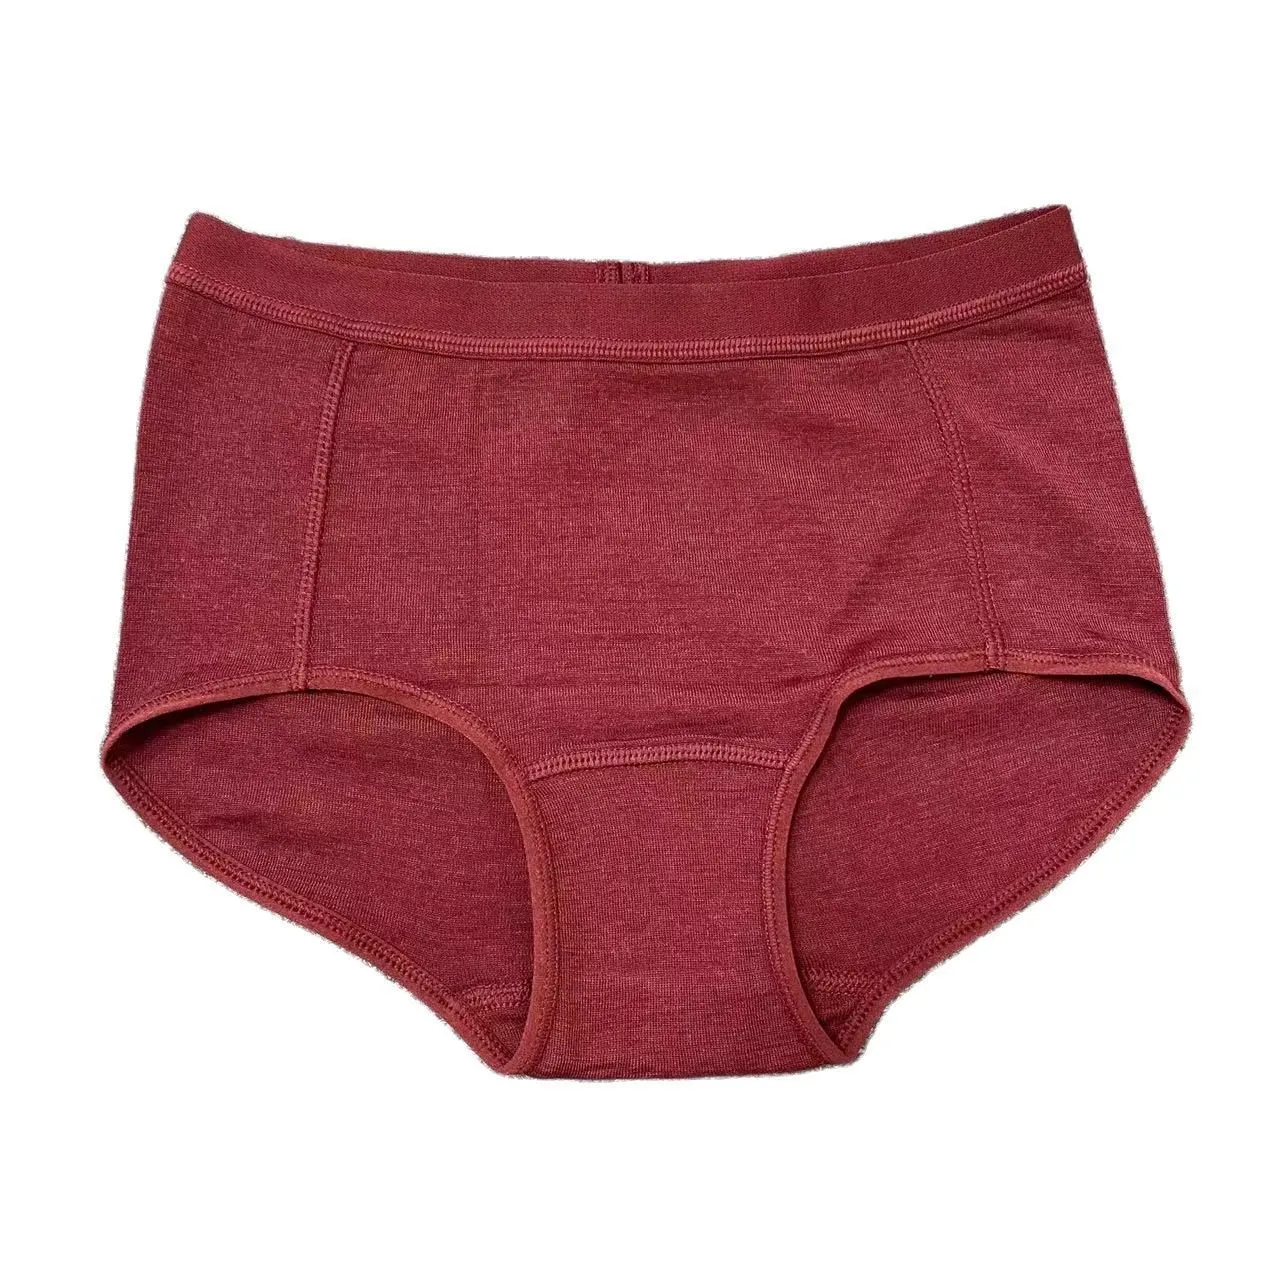 Soft And Lightweight Womens Merino Wool Athletic Incontinence Briefs For  Women 180g From Kong00, $20.7